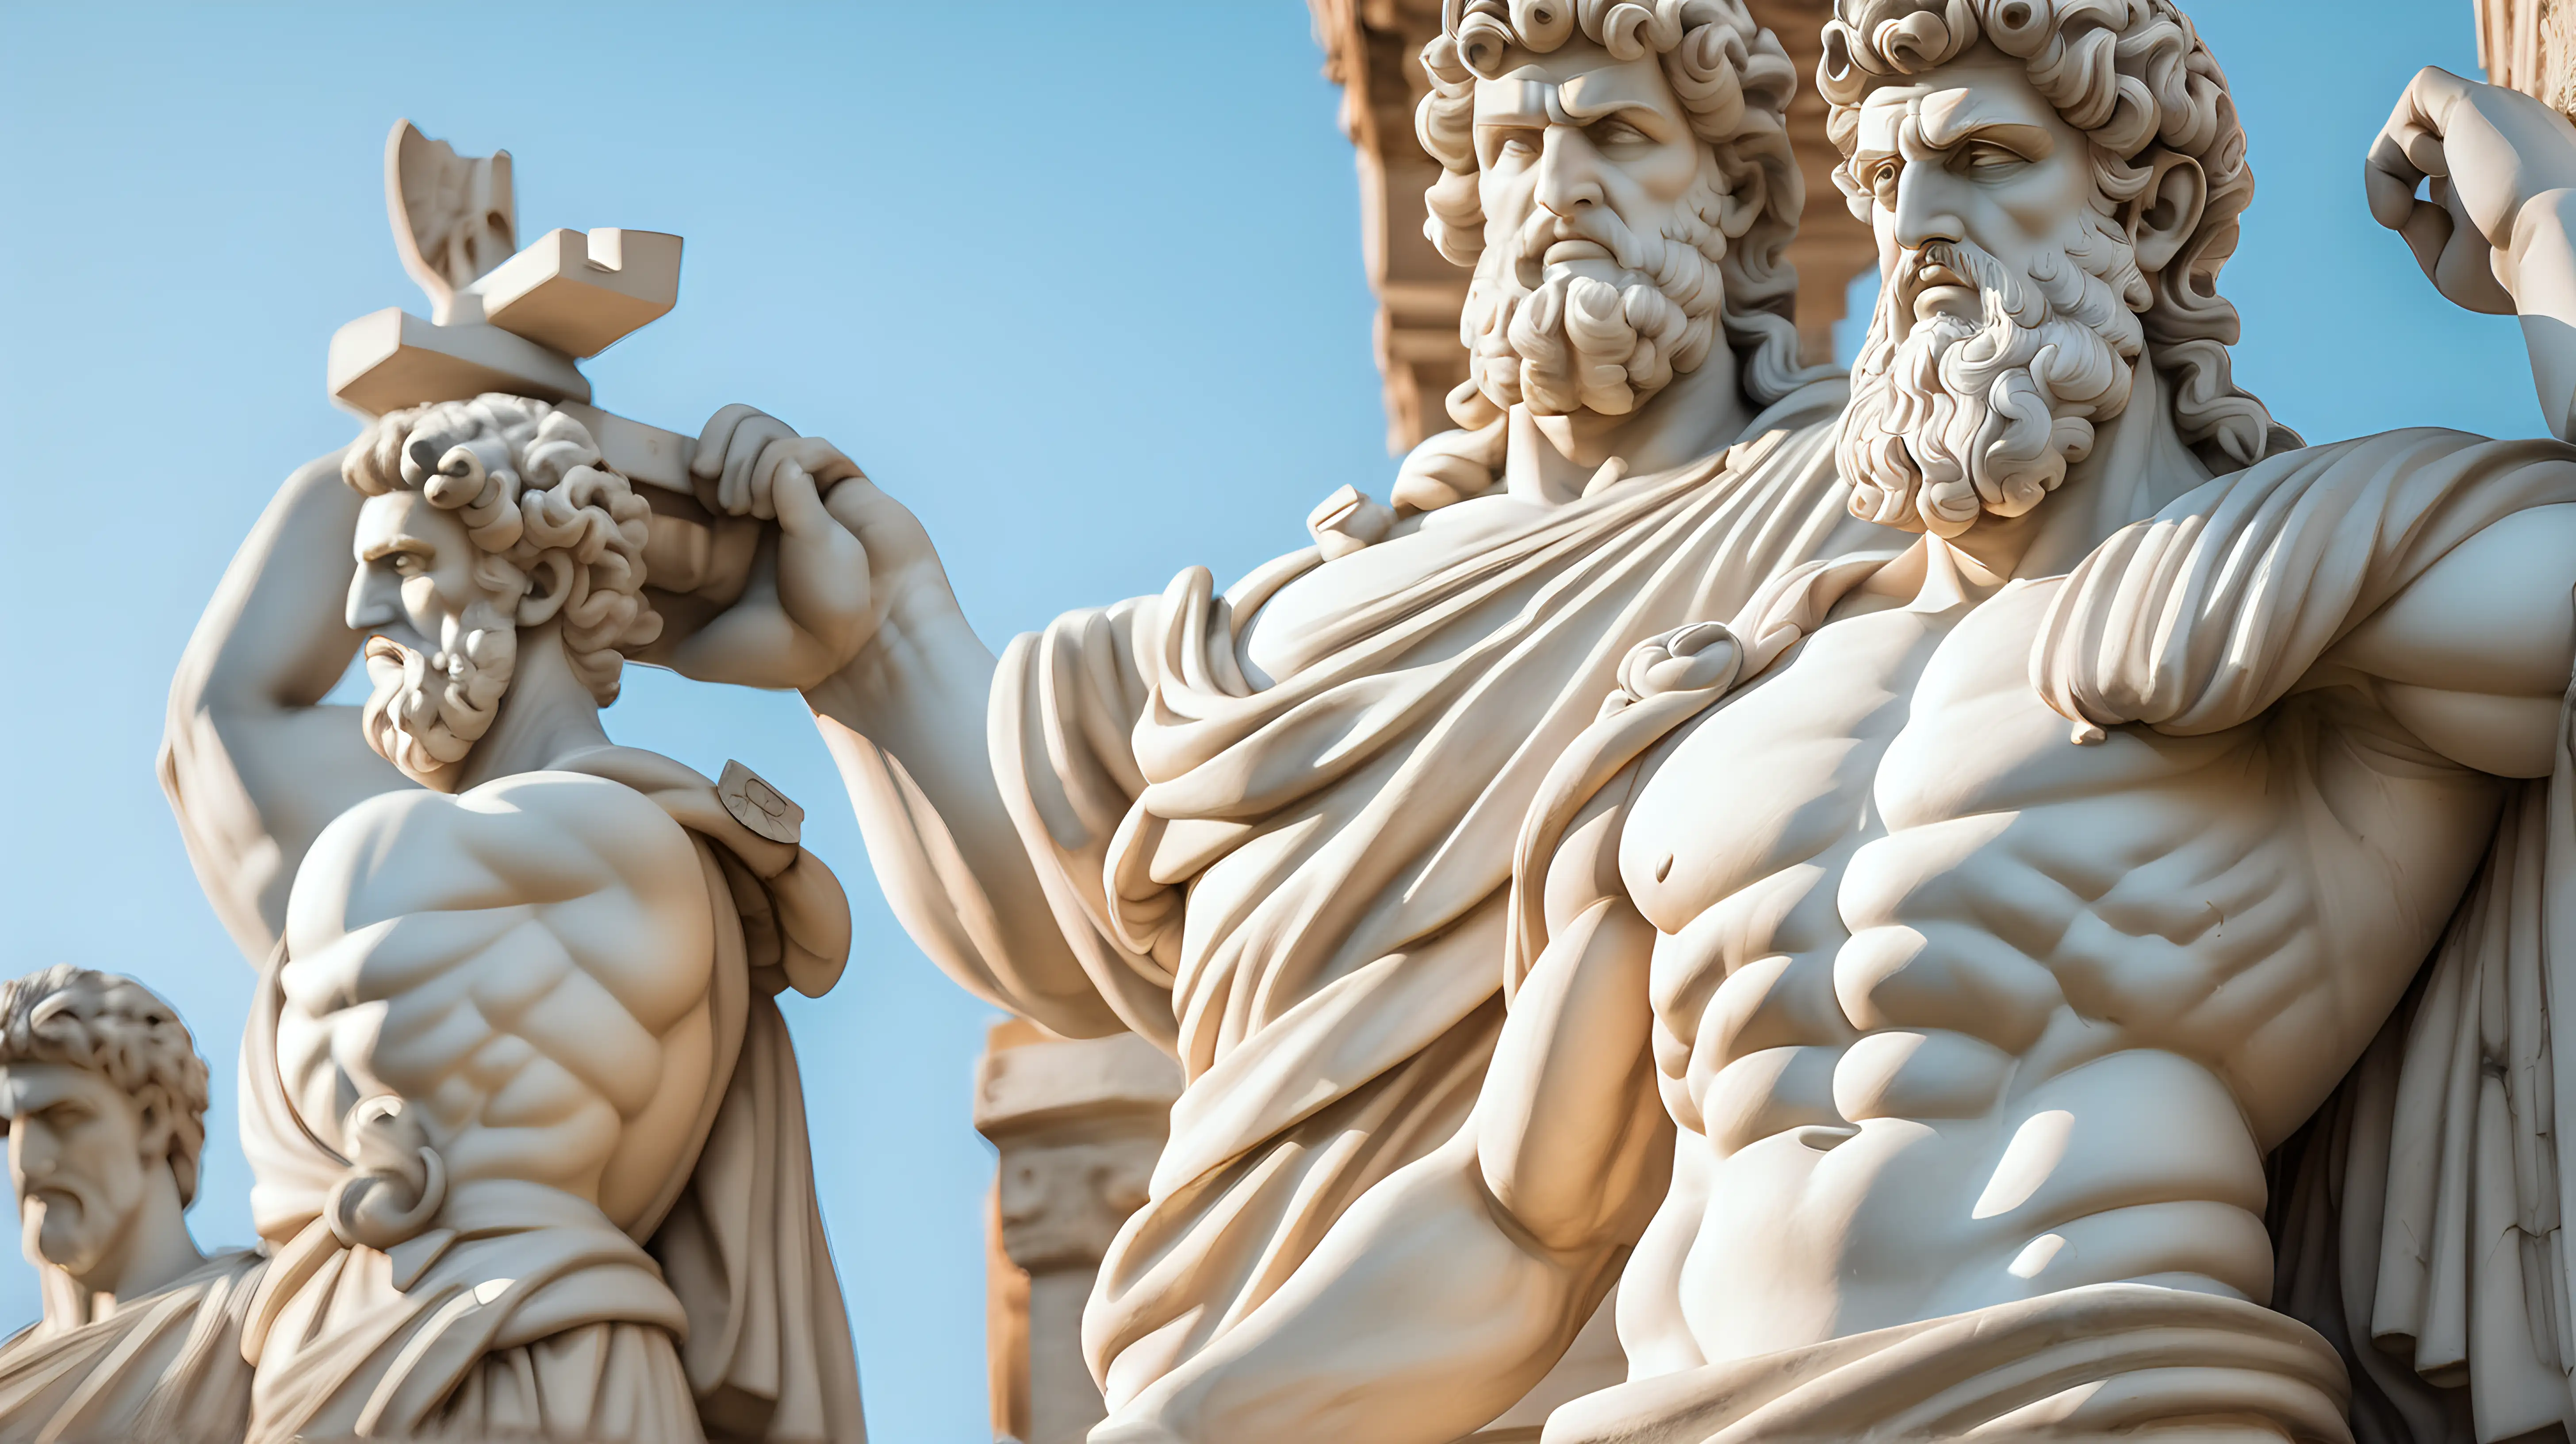 Stoic Muscular Statues Looking at Ancient City